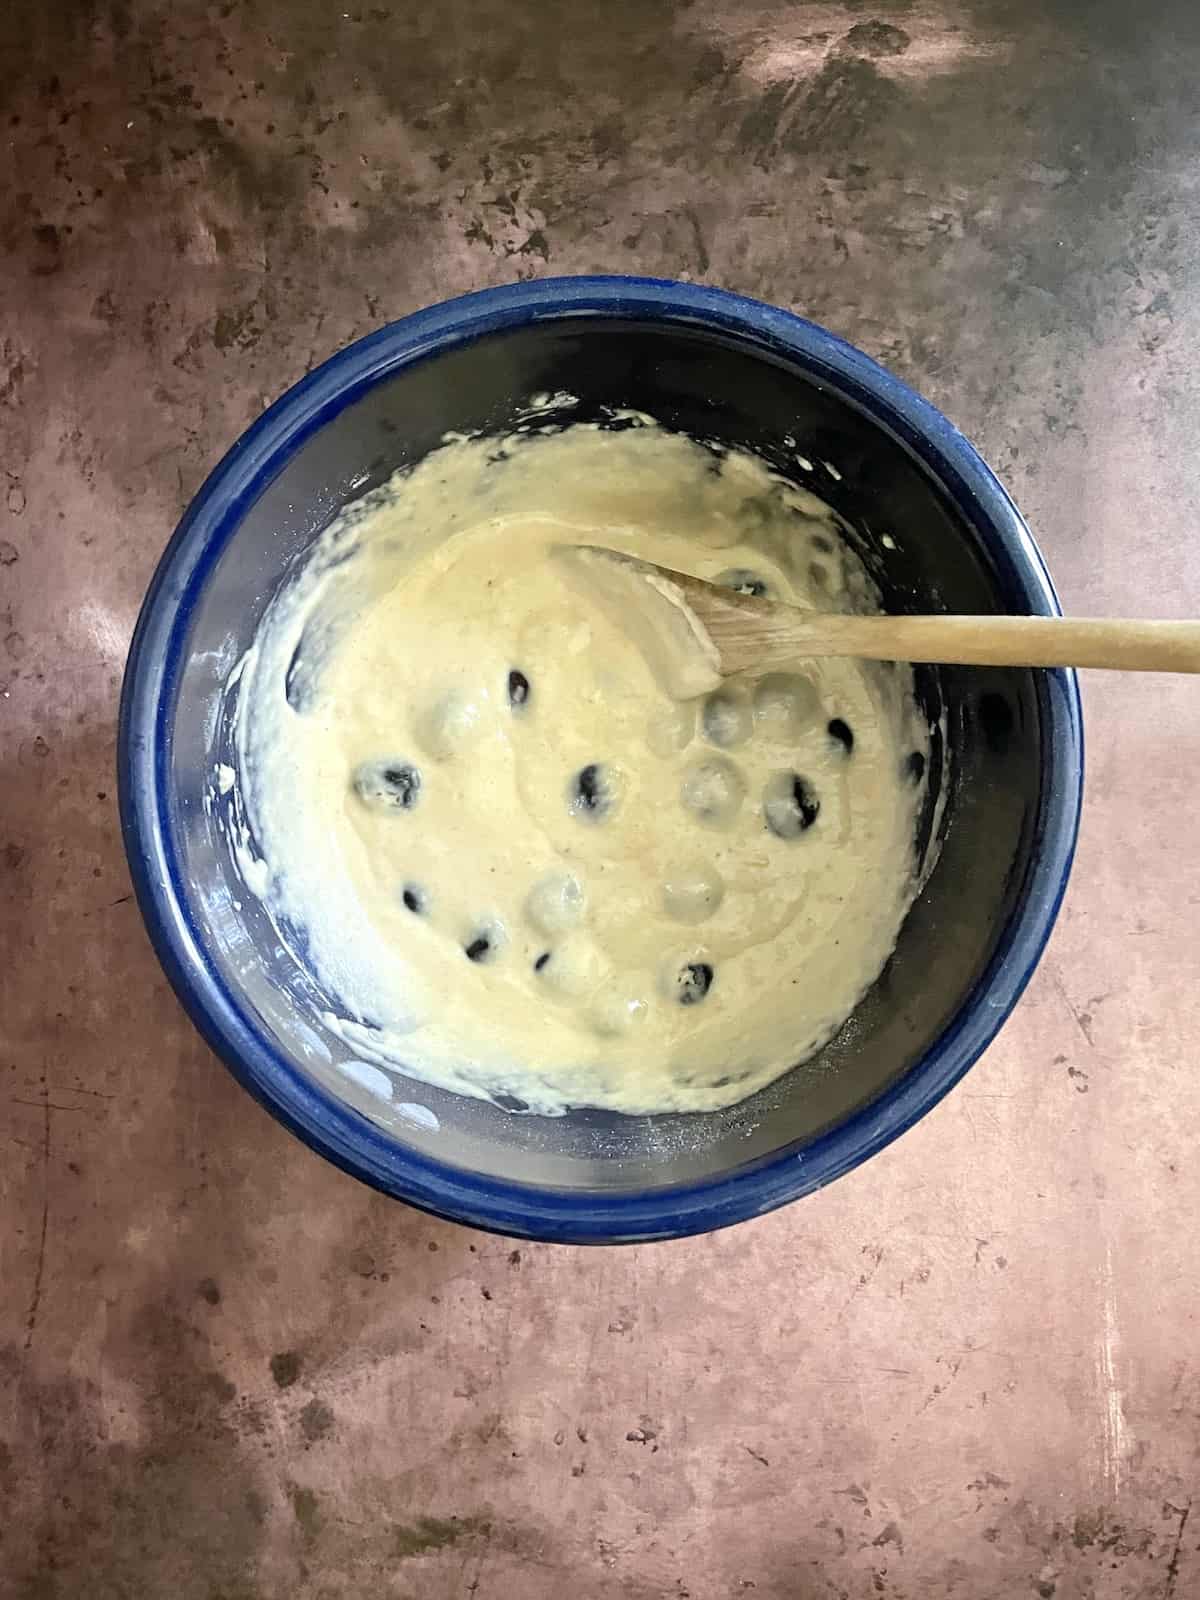 Batter with blueberries.